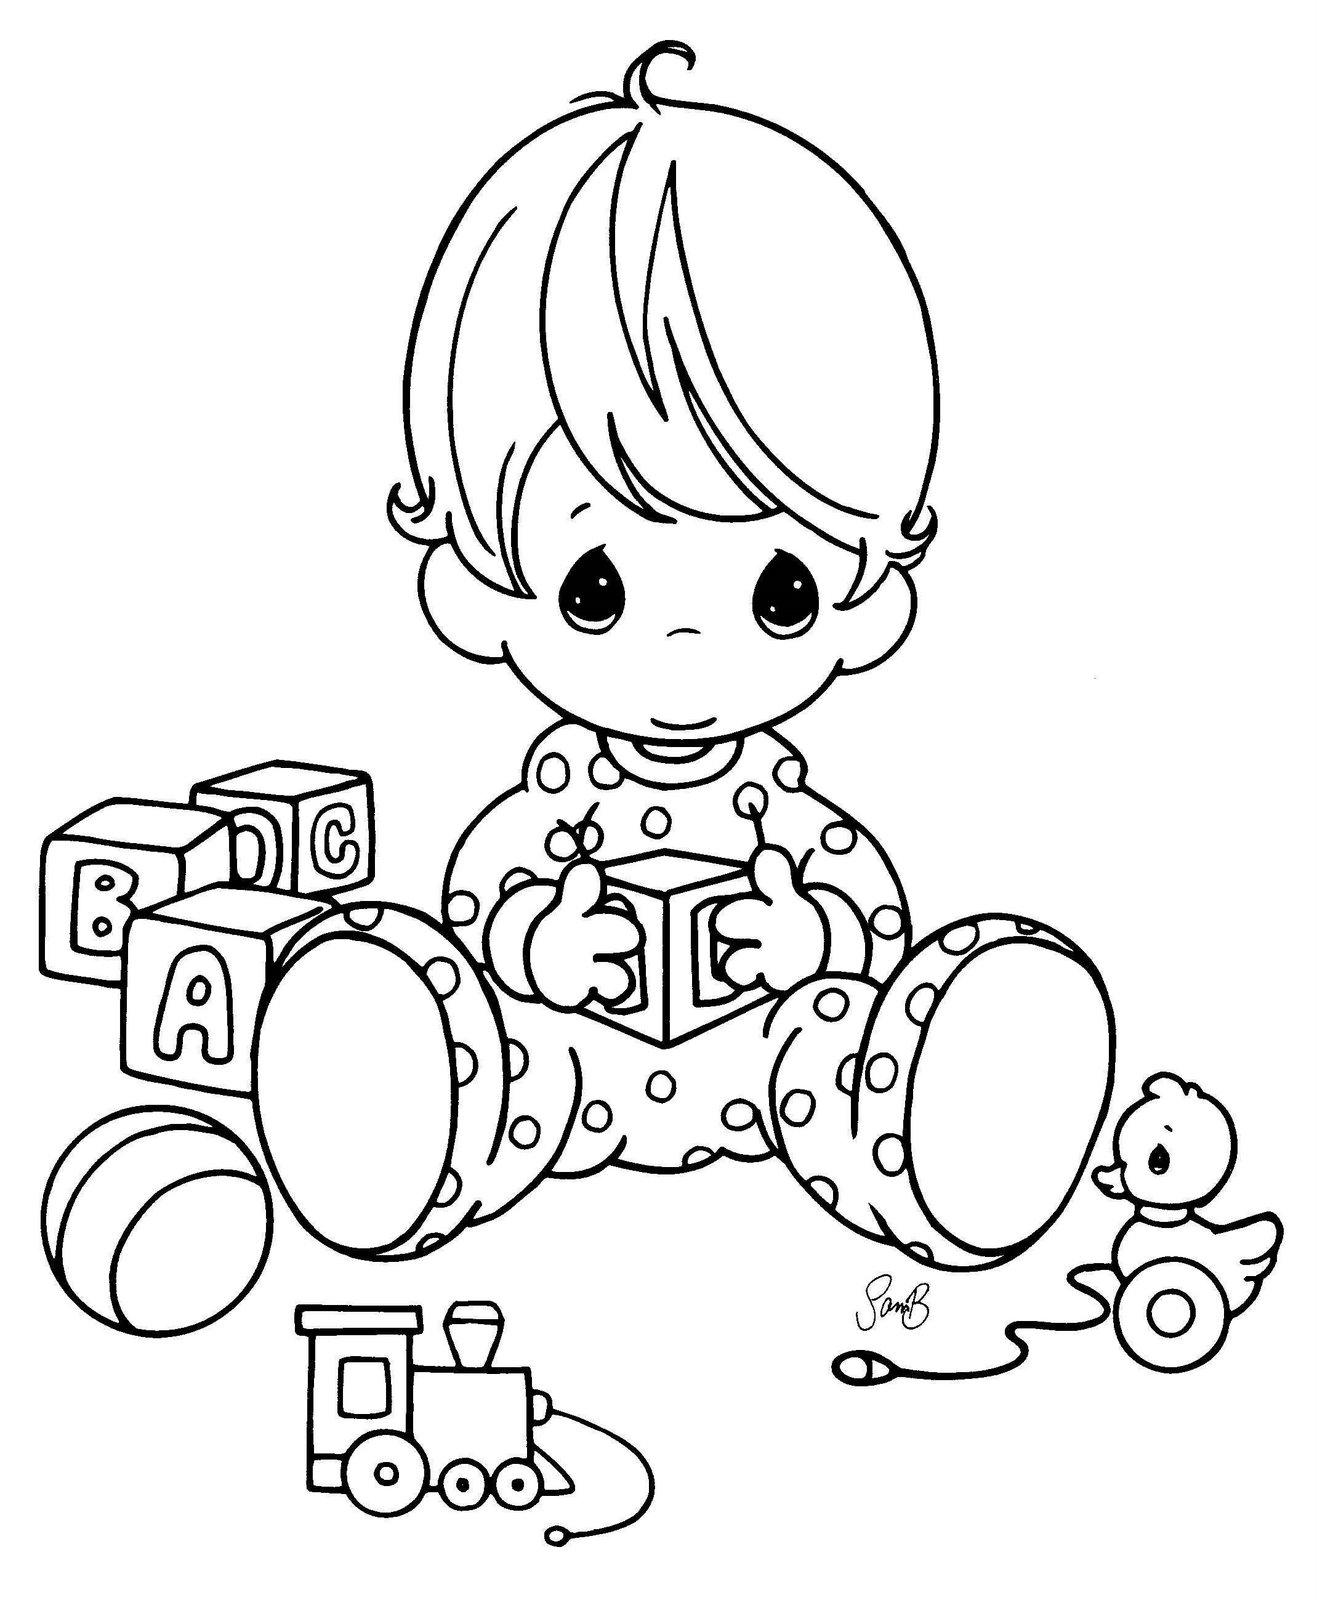 Baby Printable - Coloring Pages for Kids and for Adults